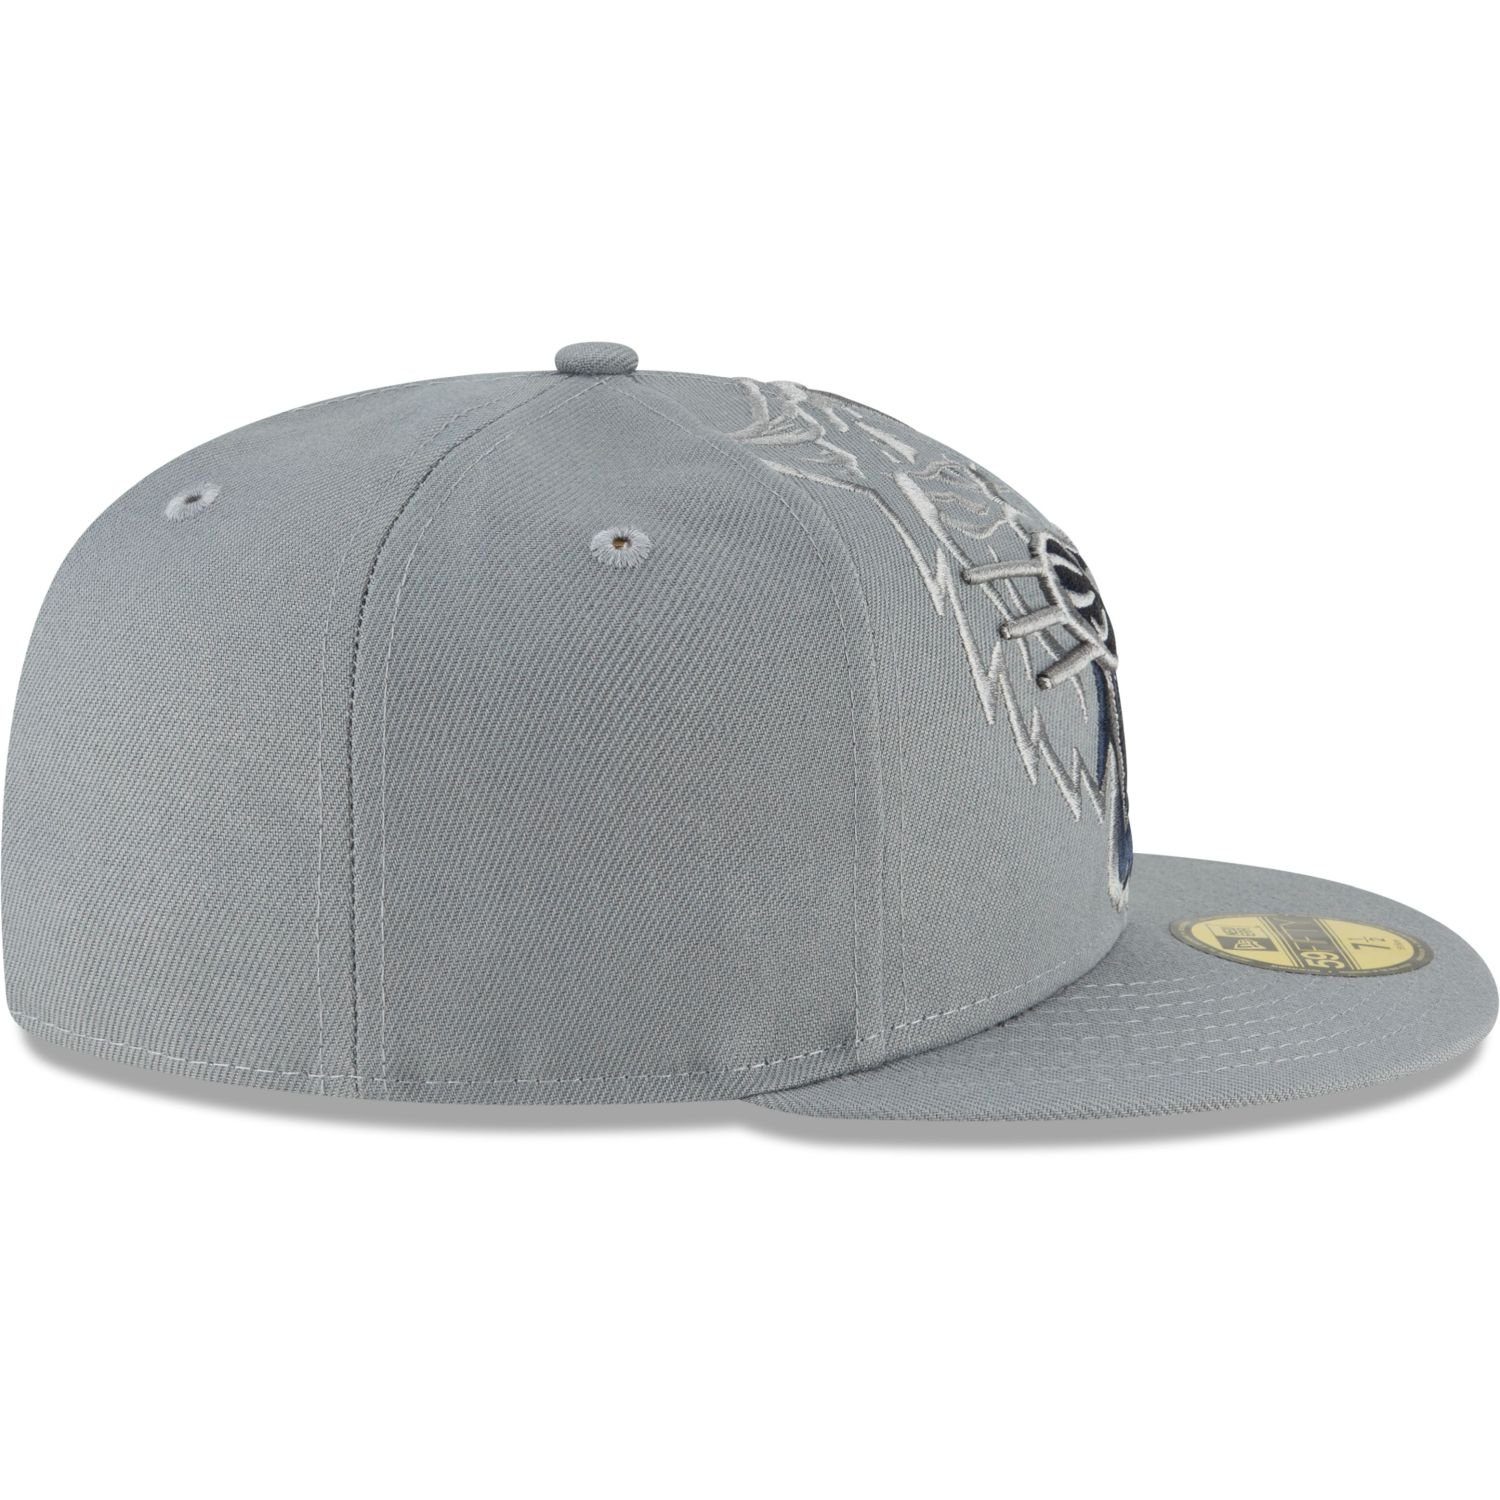 Cooperstown New Fitted Team 59Fifty STORM MLB Tigers Detroit GREY Era Cap